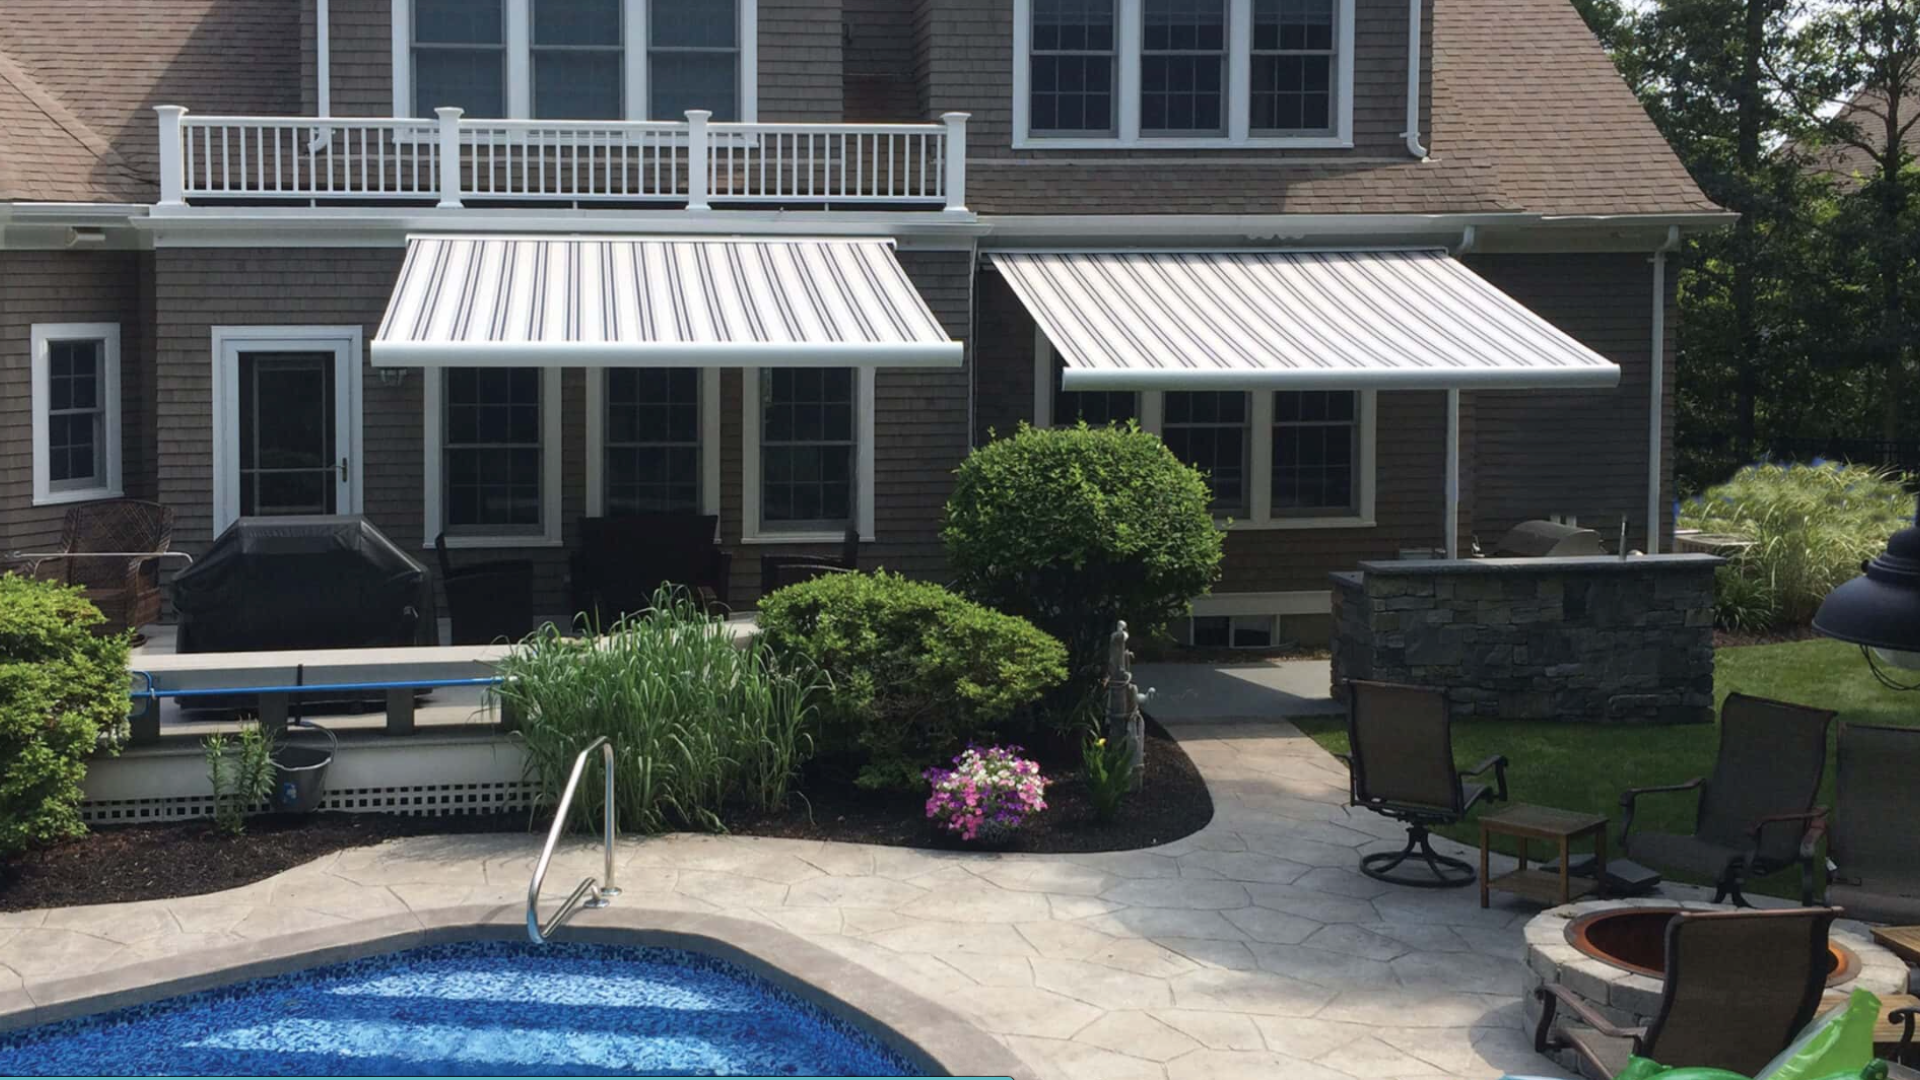 Where to Find Amazing Affordable Retractable Awnings